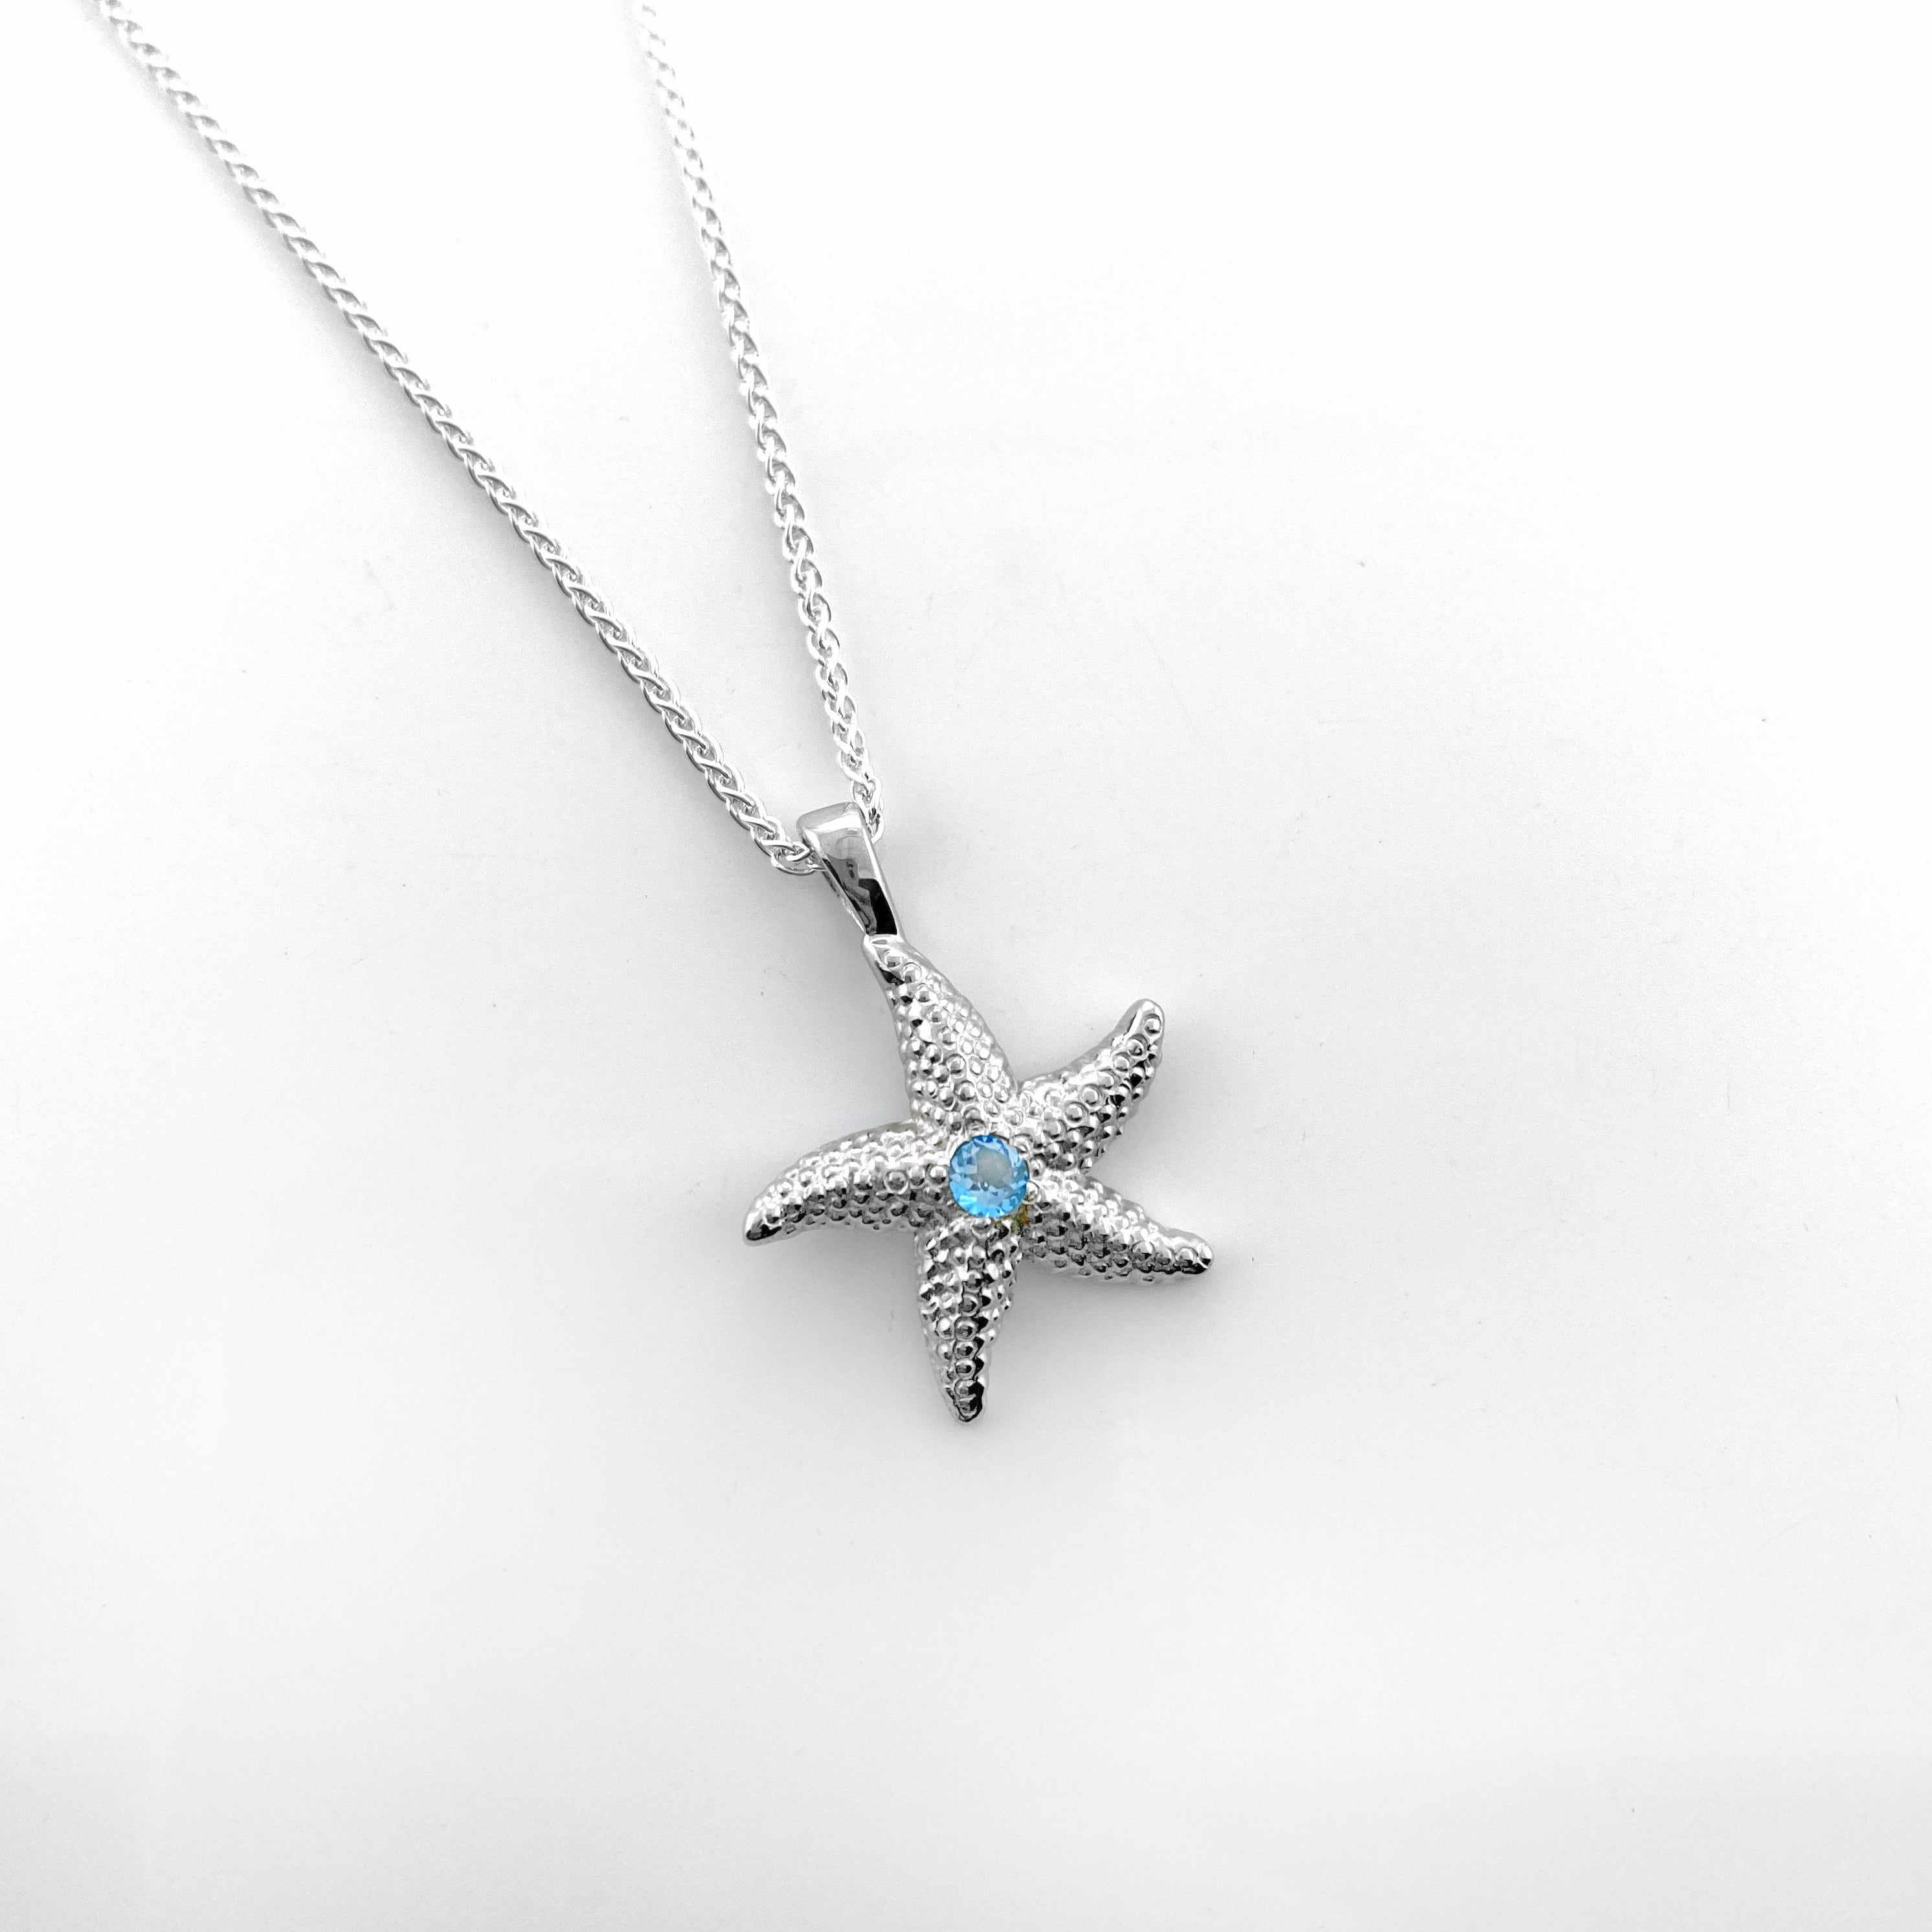 Starfish necklace – Cabbage White England